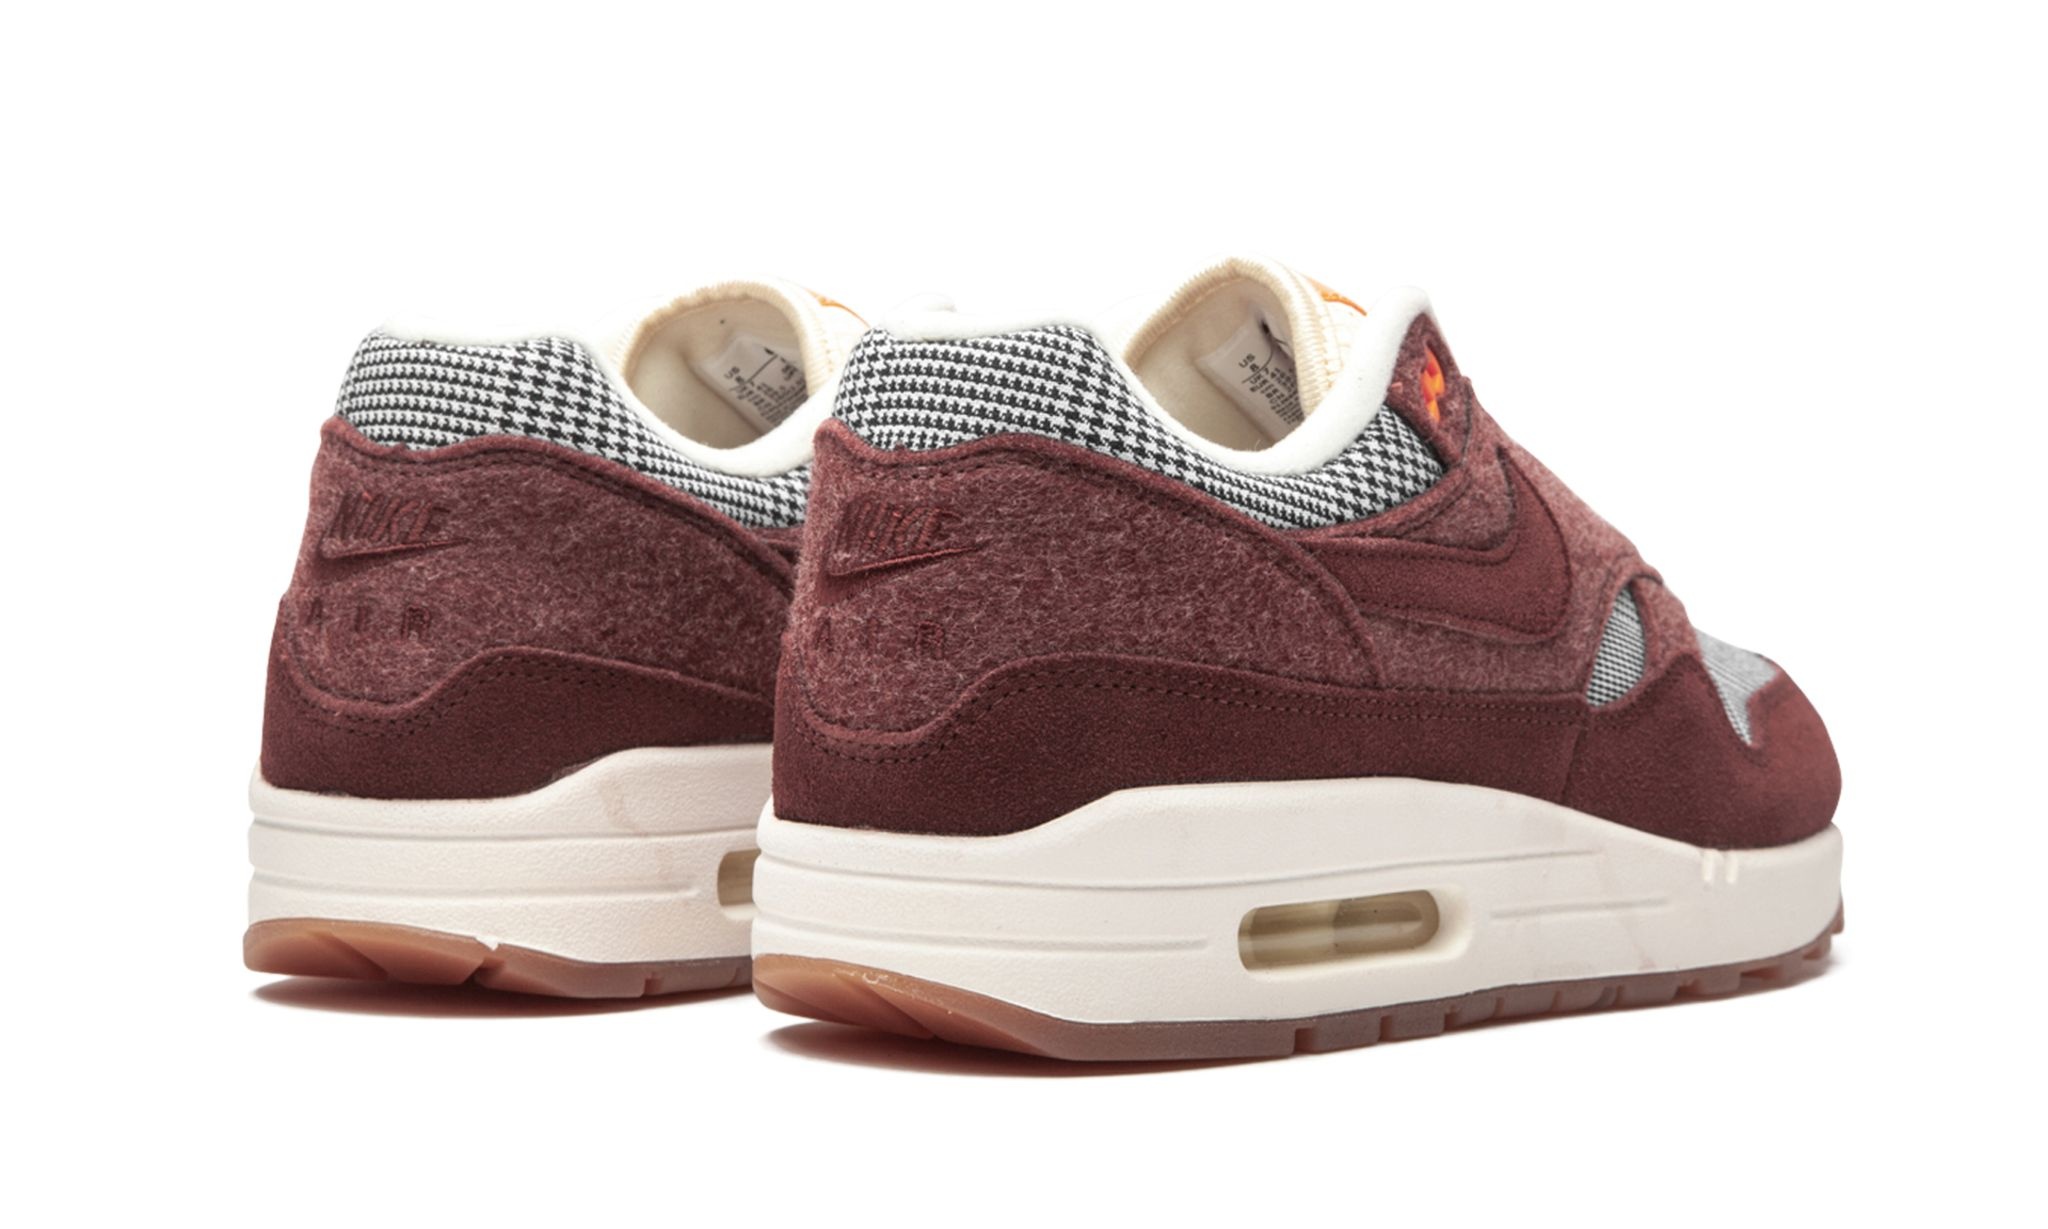 Air Max 1 "Houndstooth" - 3